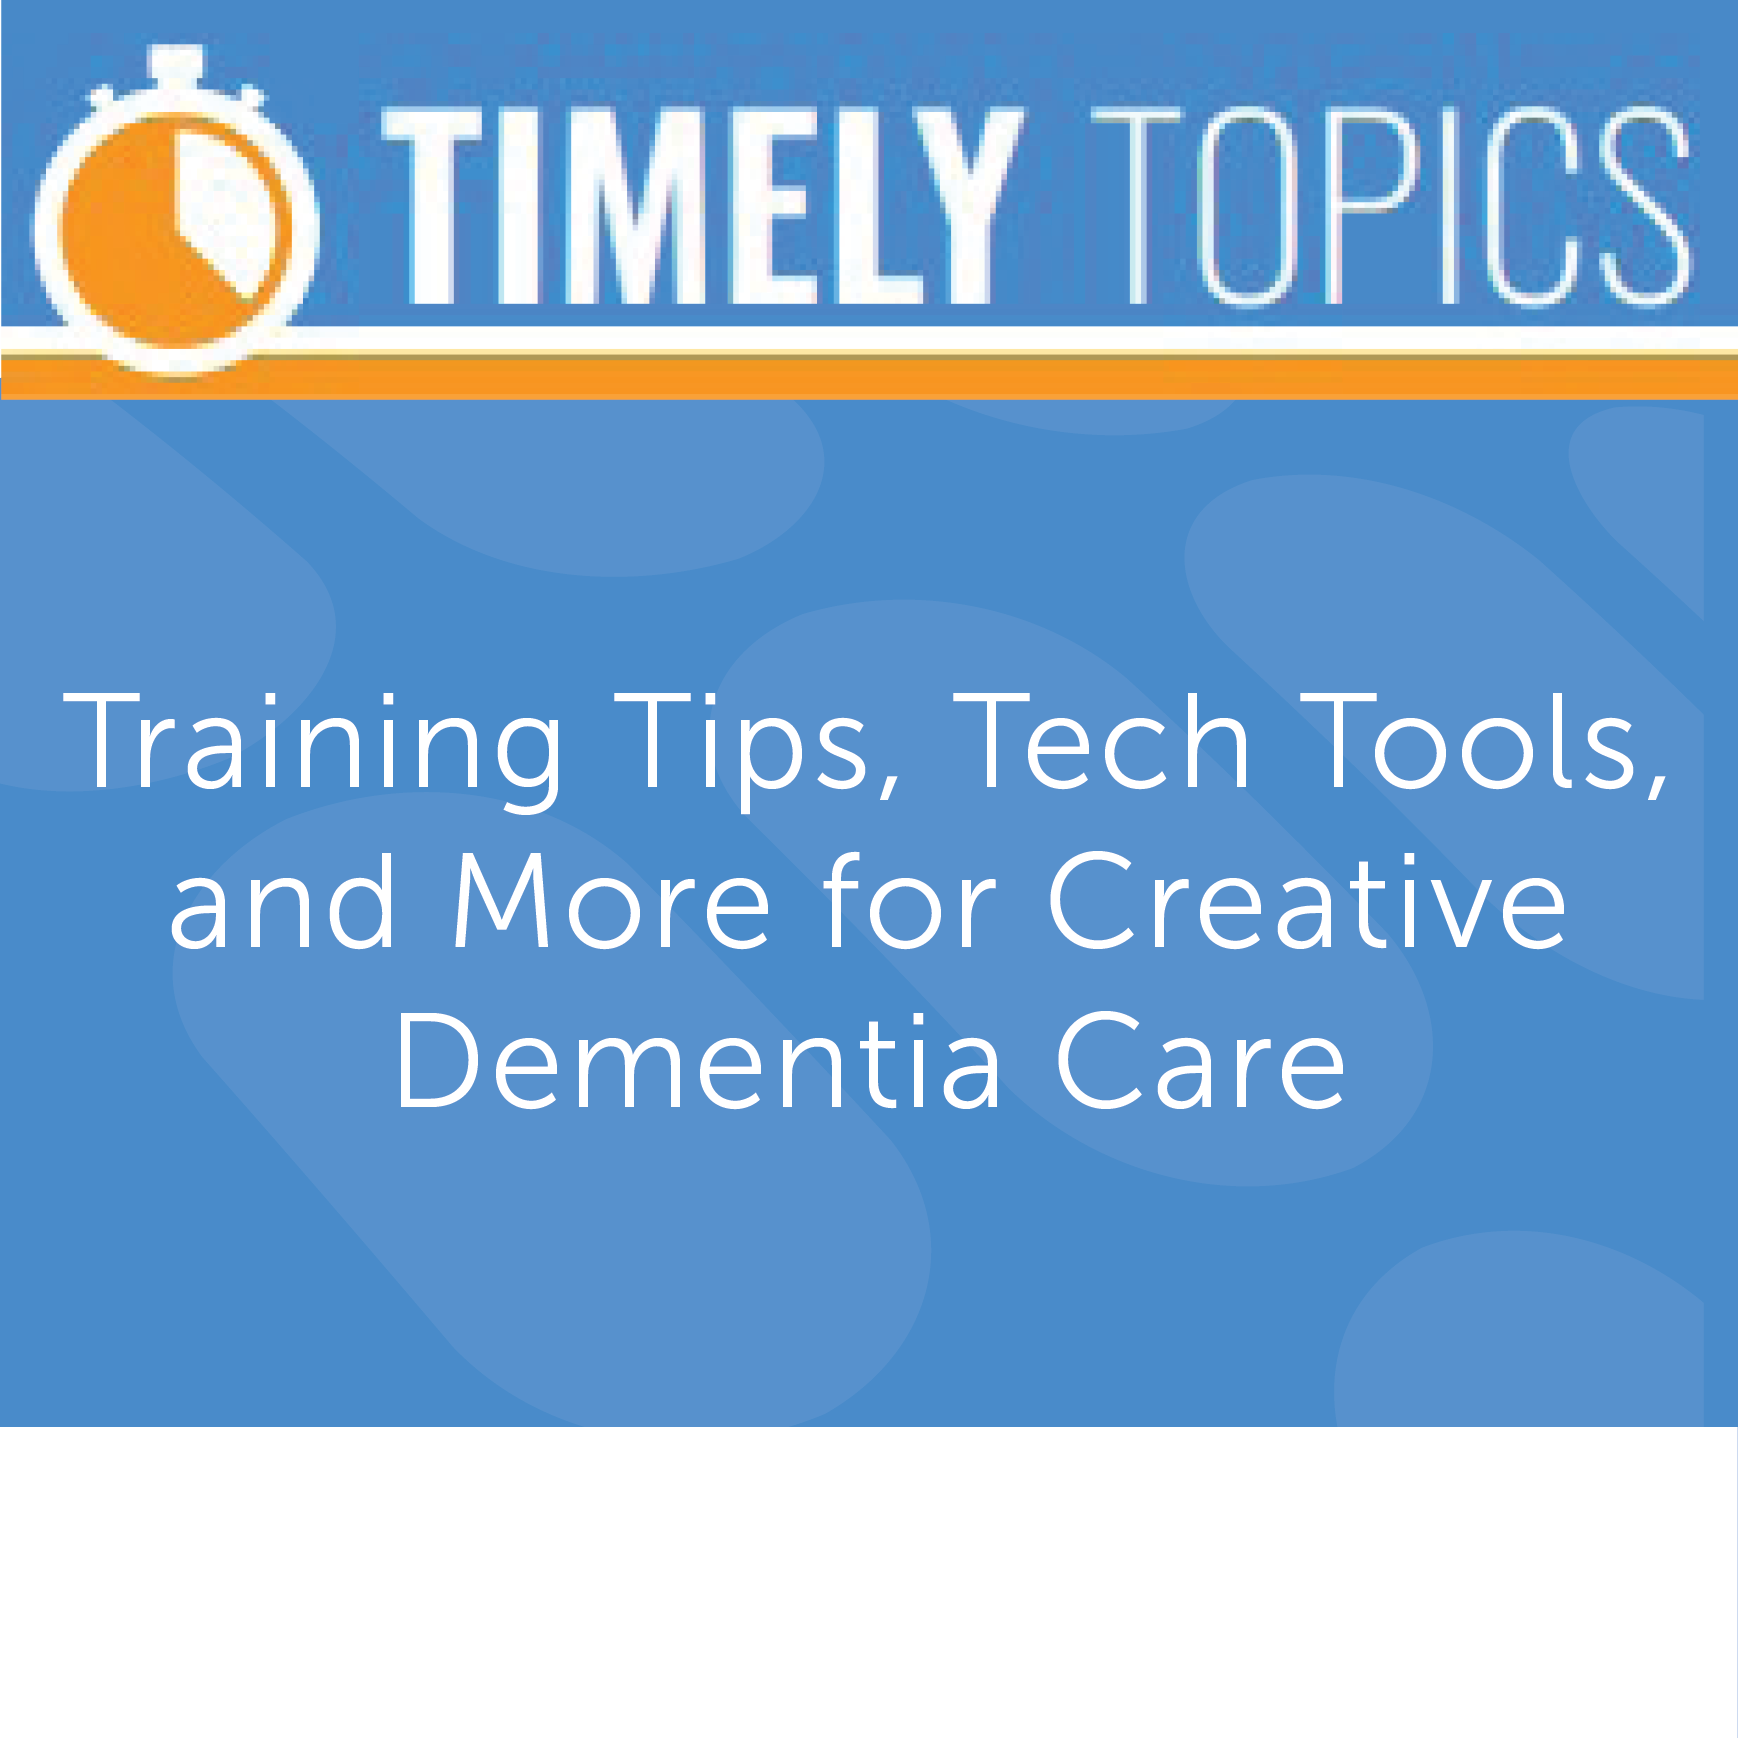 Timely Topic on creative dementia care in senior living